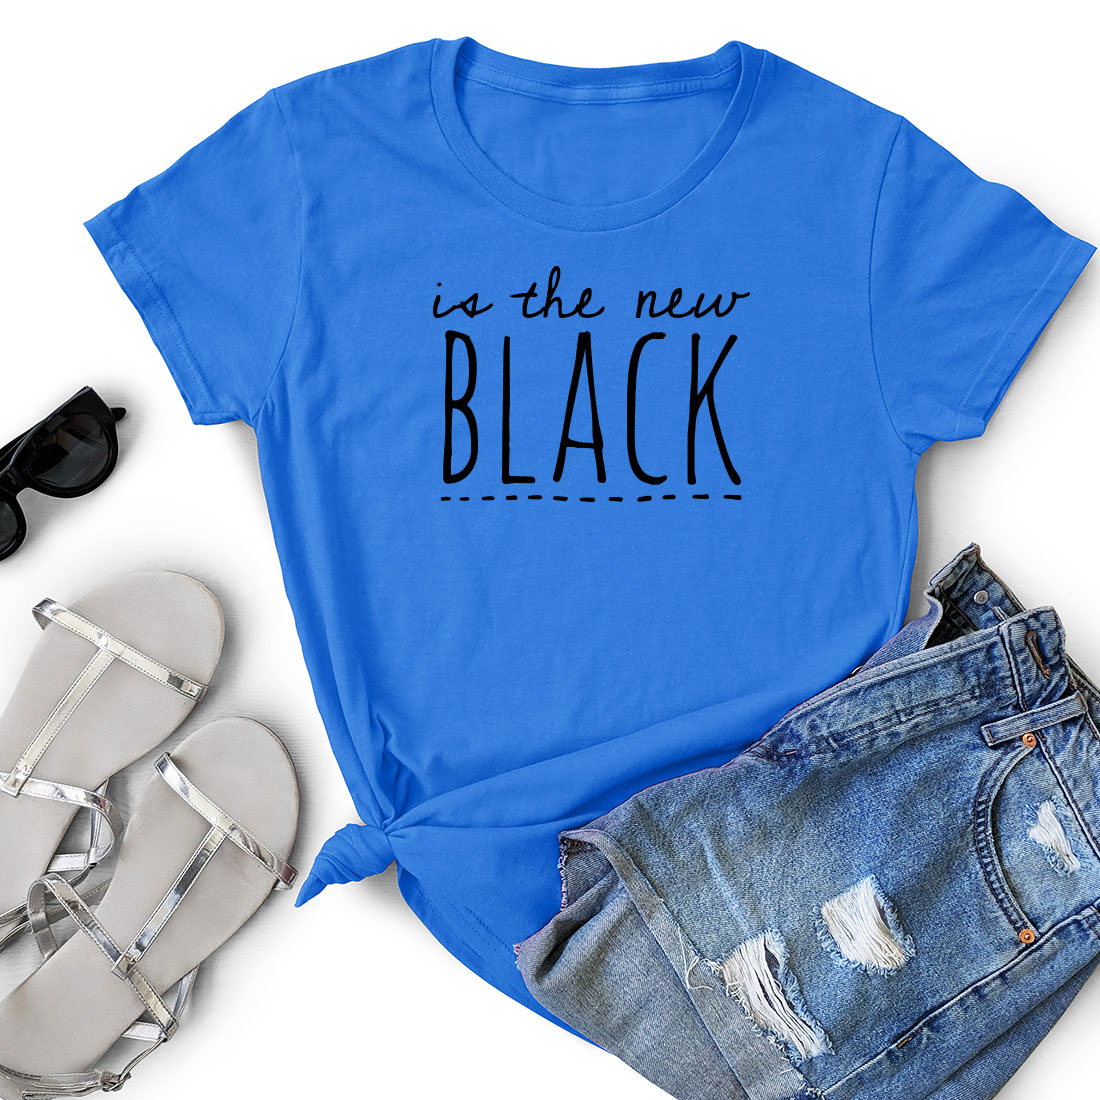 Blue shirt that says is the new black.